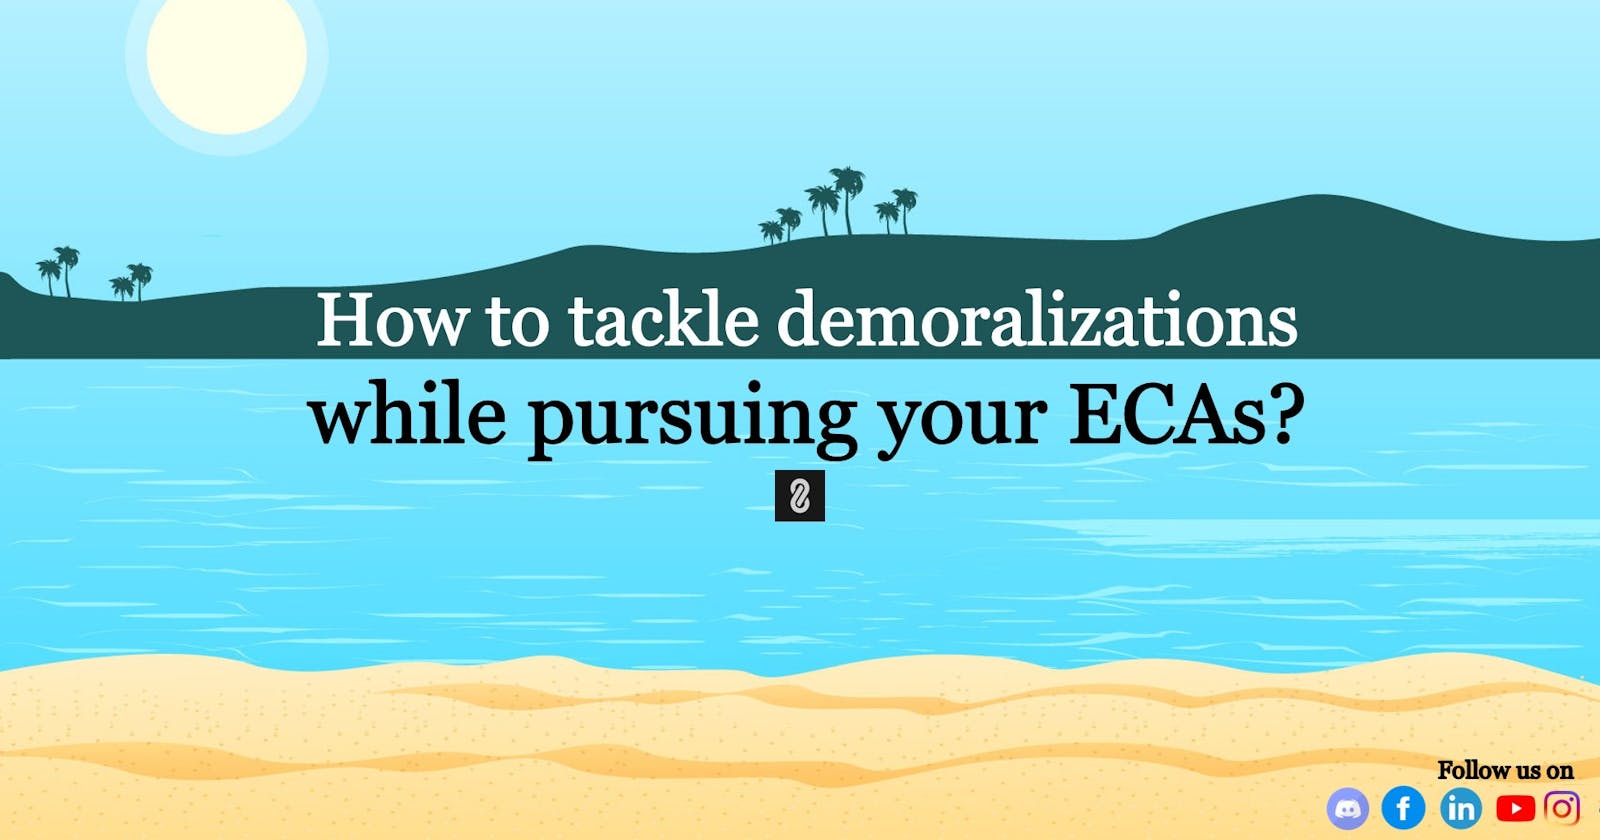 How to tackle demoralizations while pursuing your ECAs